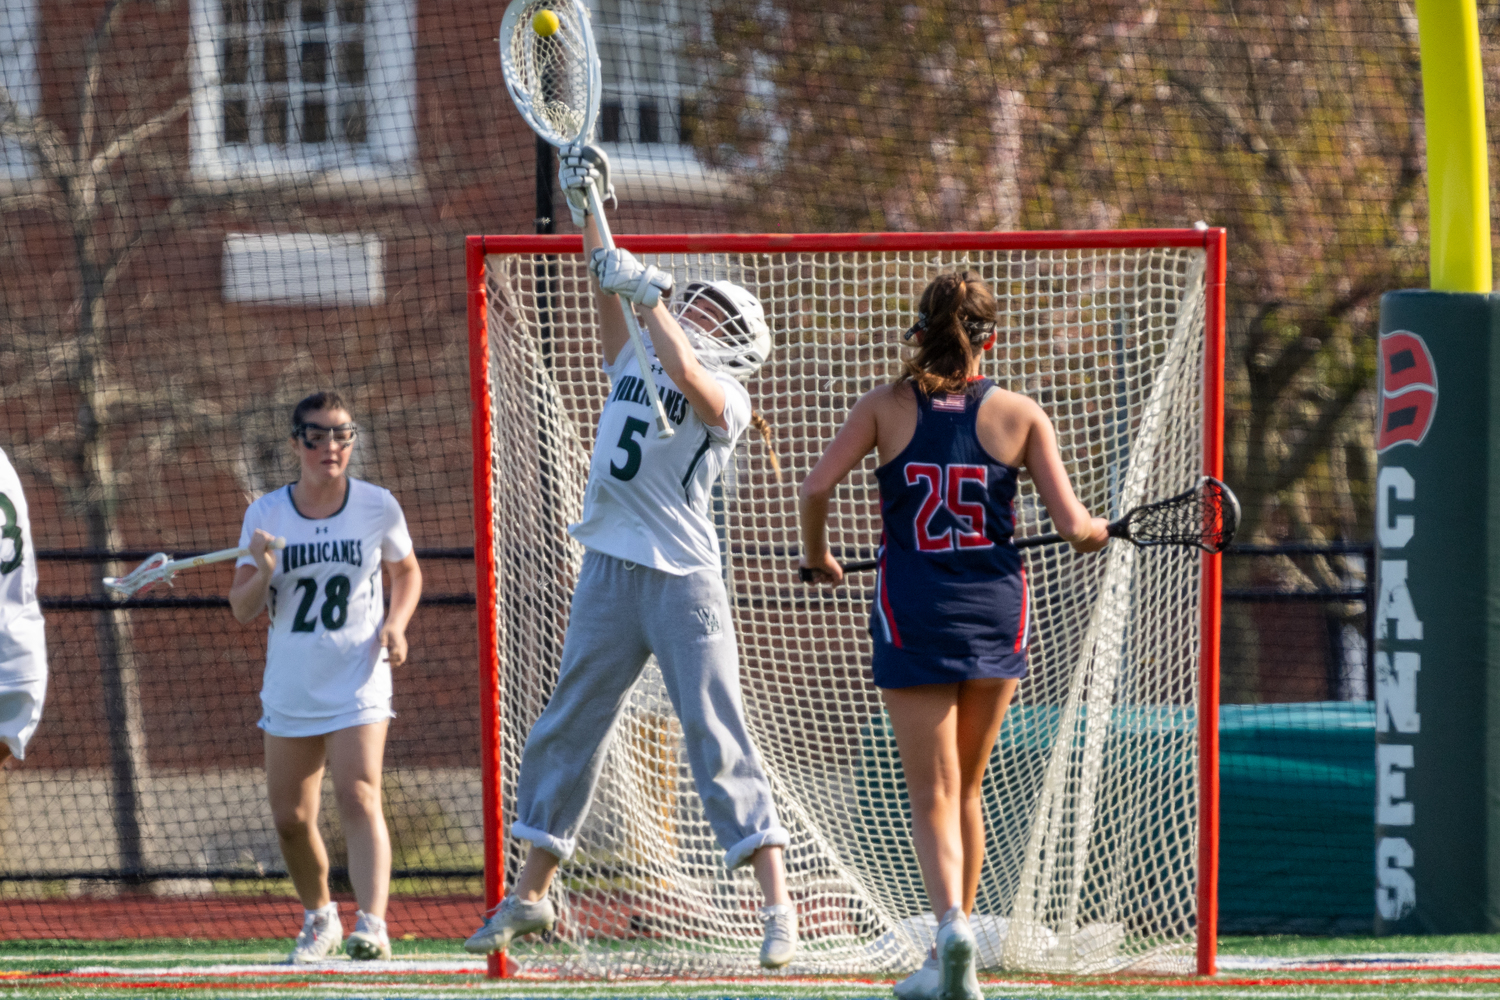 Junior goalkeeper Maya Farnan makes one of her eight saves during Westhampton Beach's 11-5 win over Miller Place April 24. RON ESPOSITO